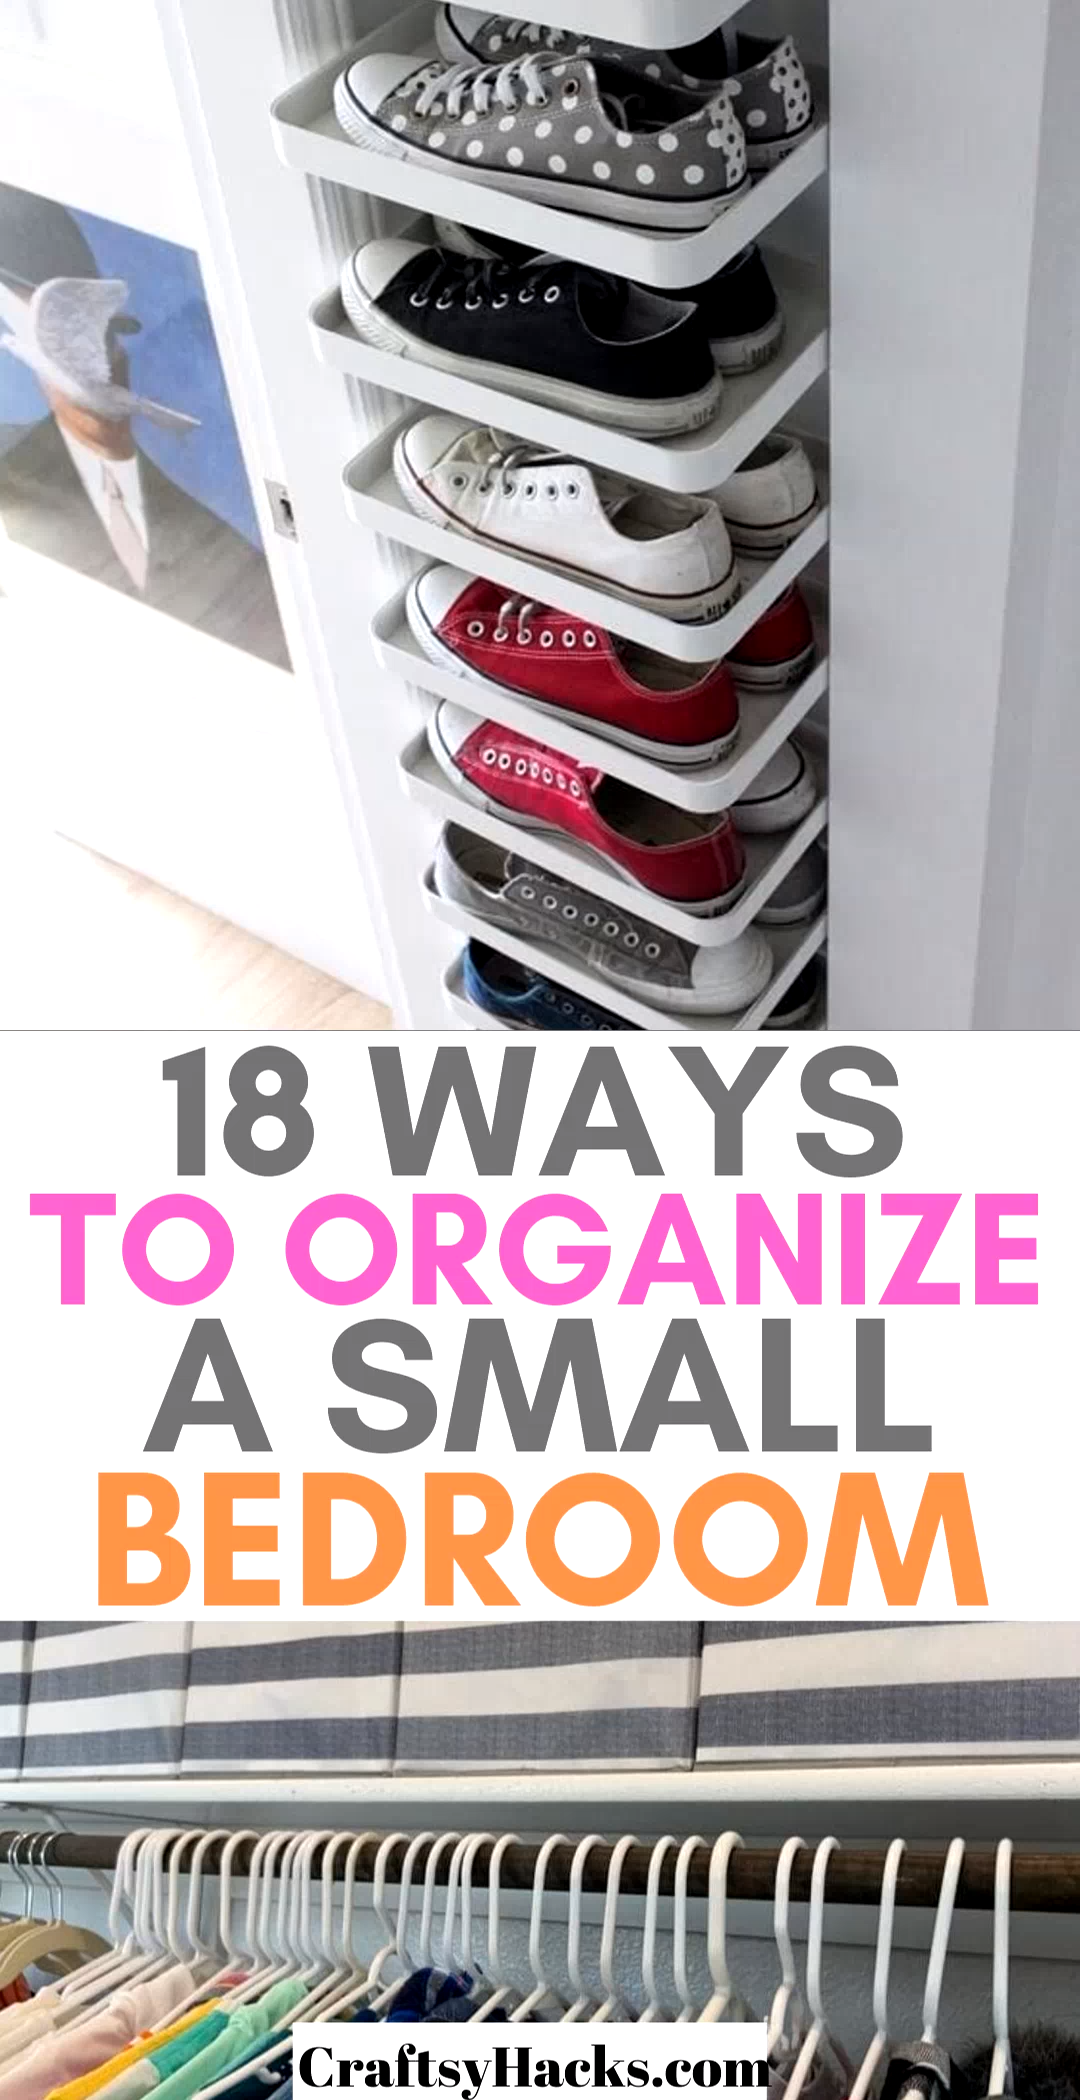 40 Ways to Organize a Small Bedroom - 40 Ways to Organize a Small Bedroom -   diy Room hacks